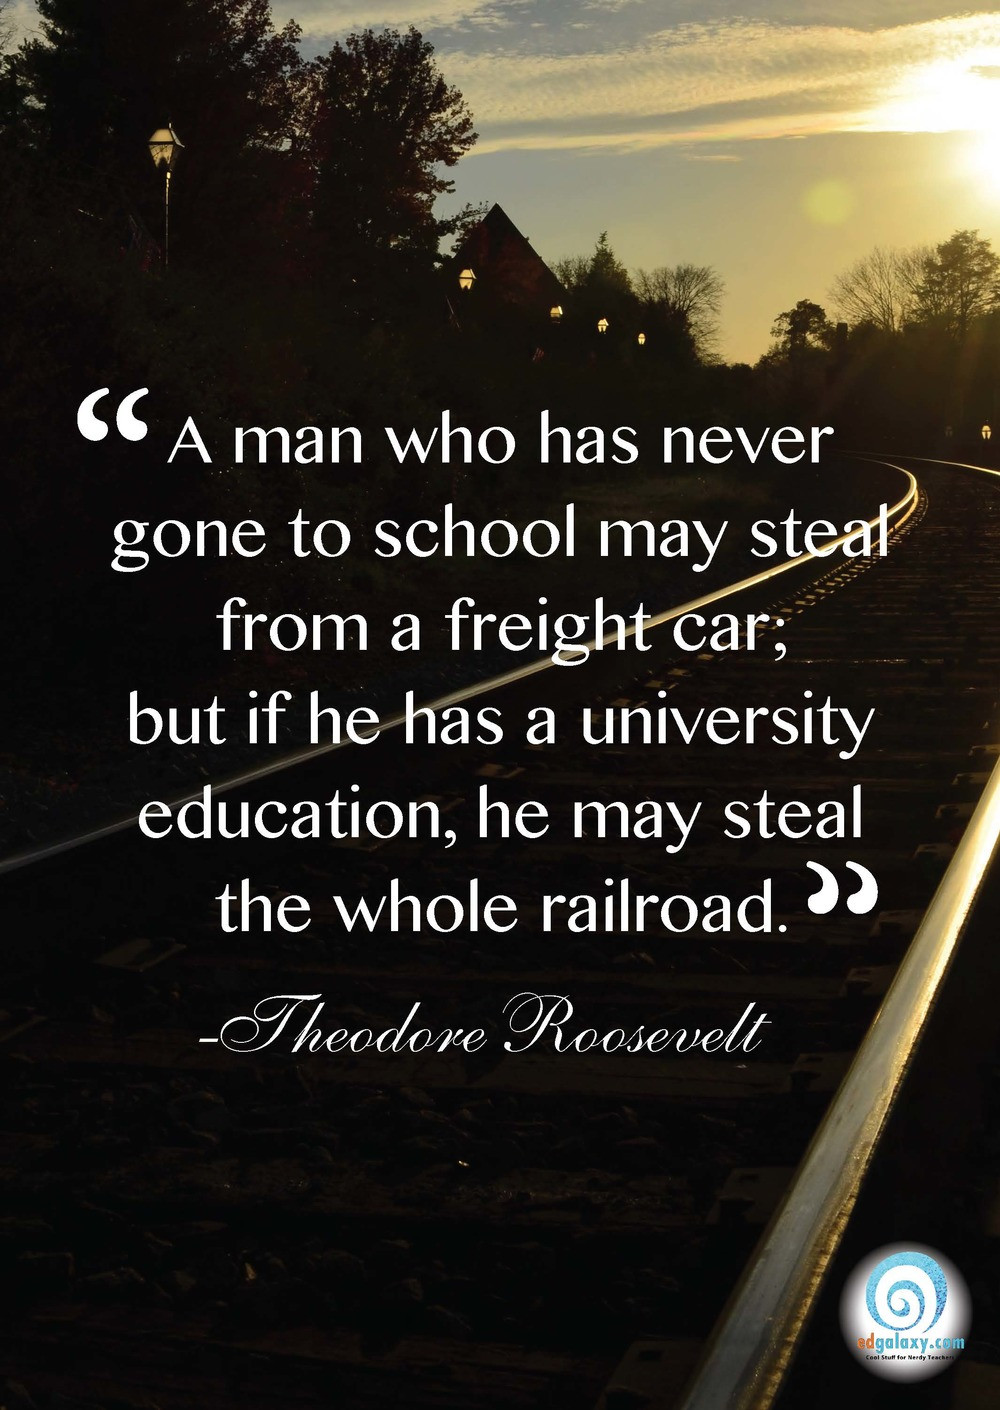 Famous Quotes About Education
 Education Quotes Famous Quotes for teachers and Students